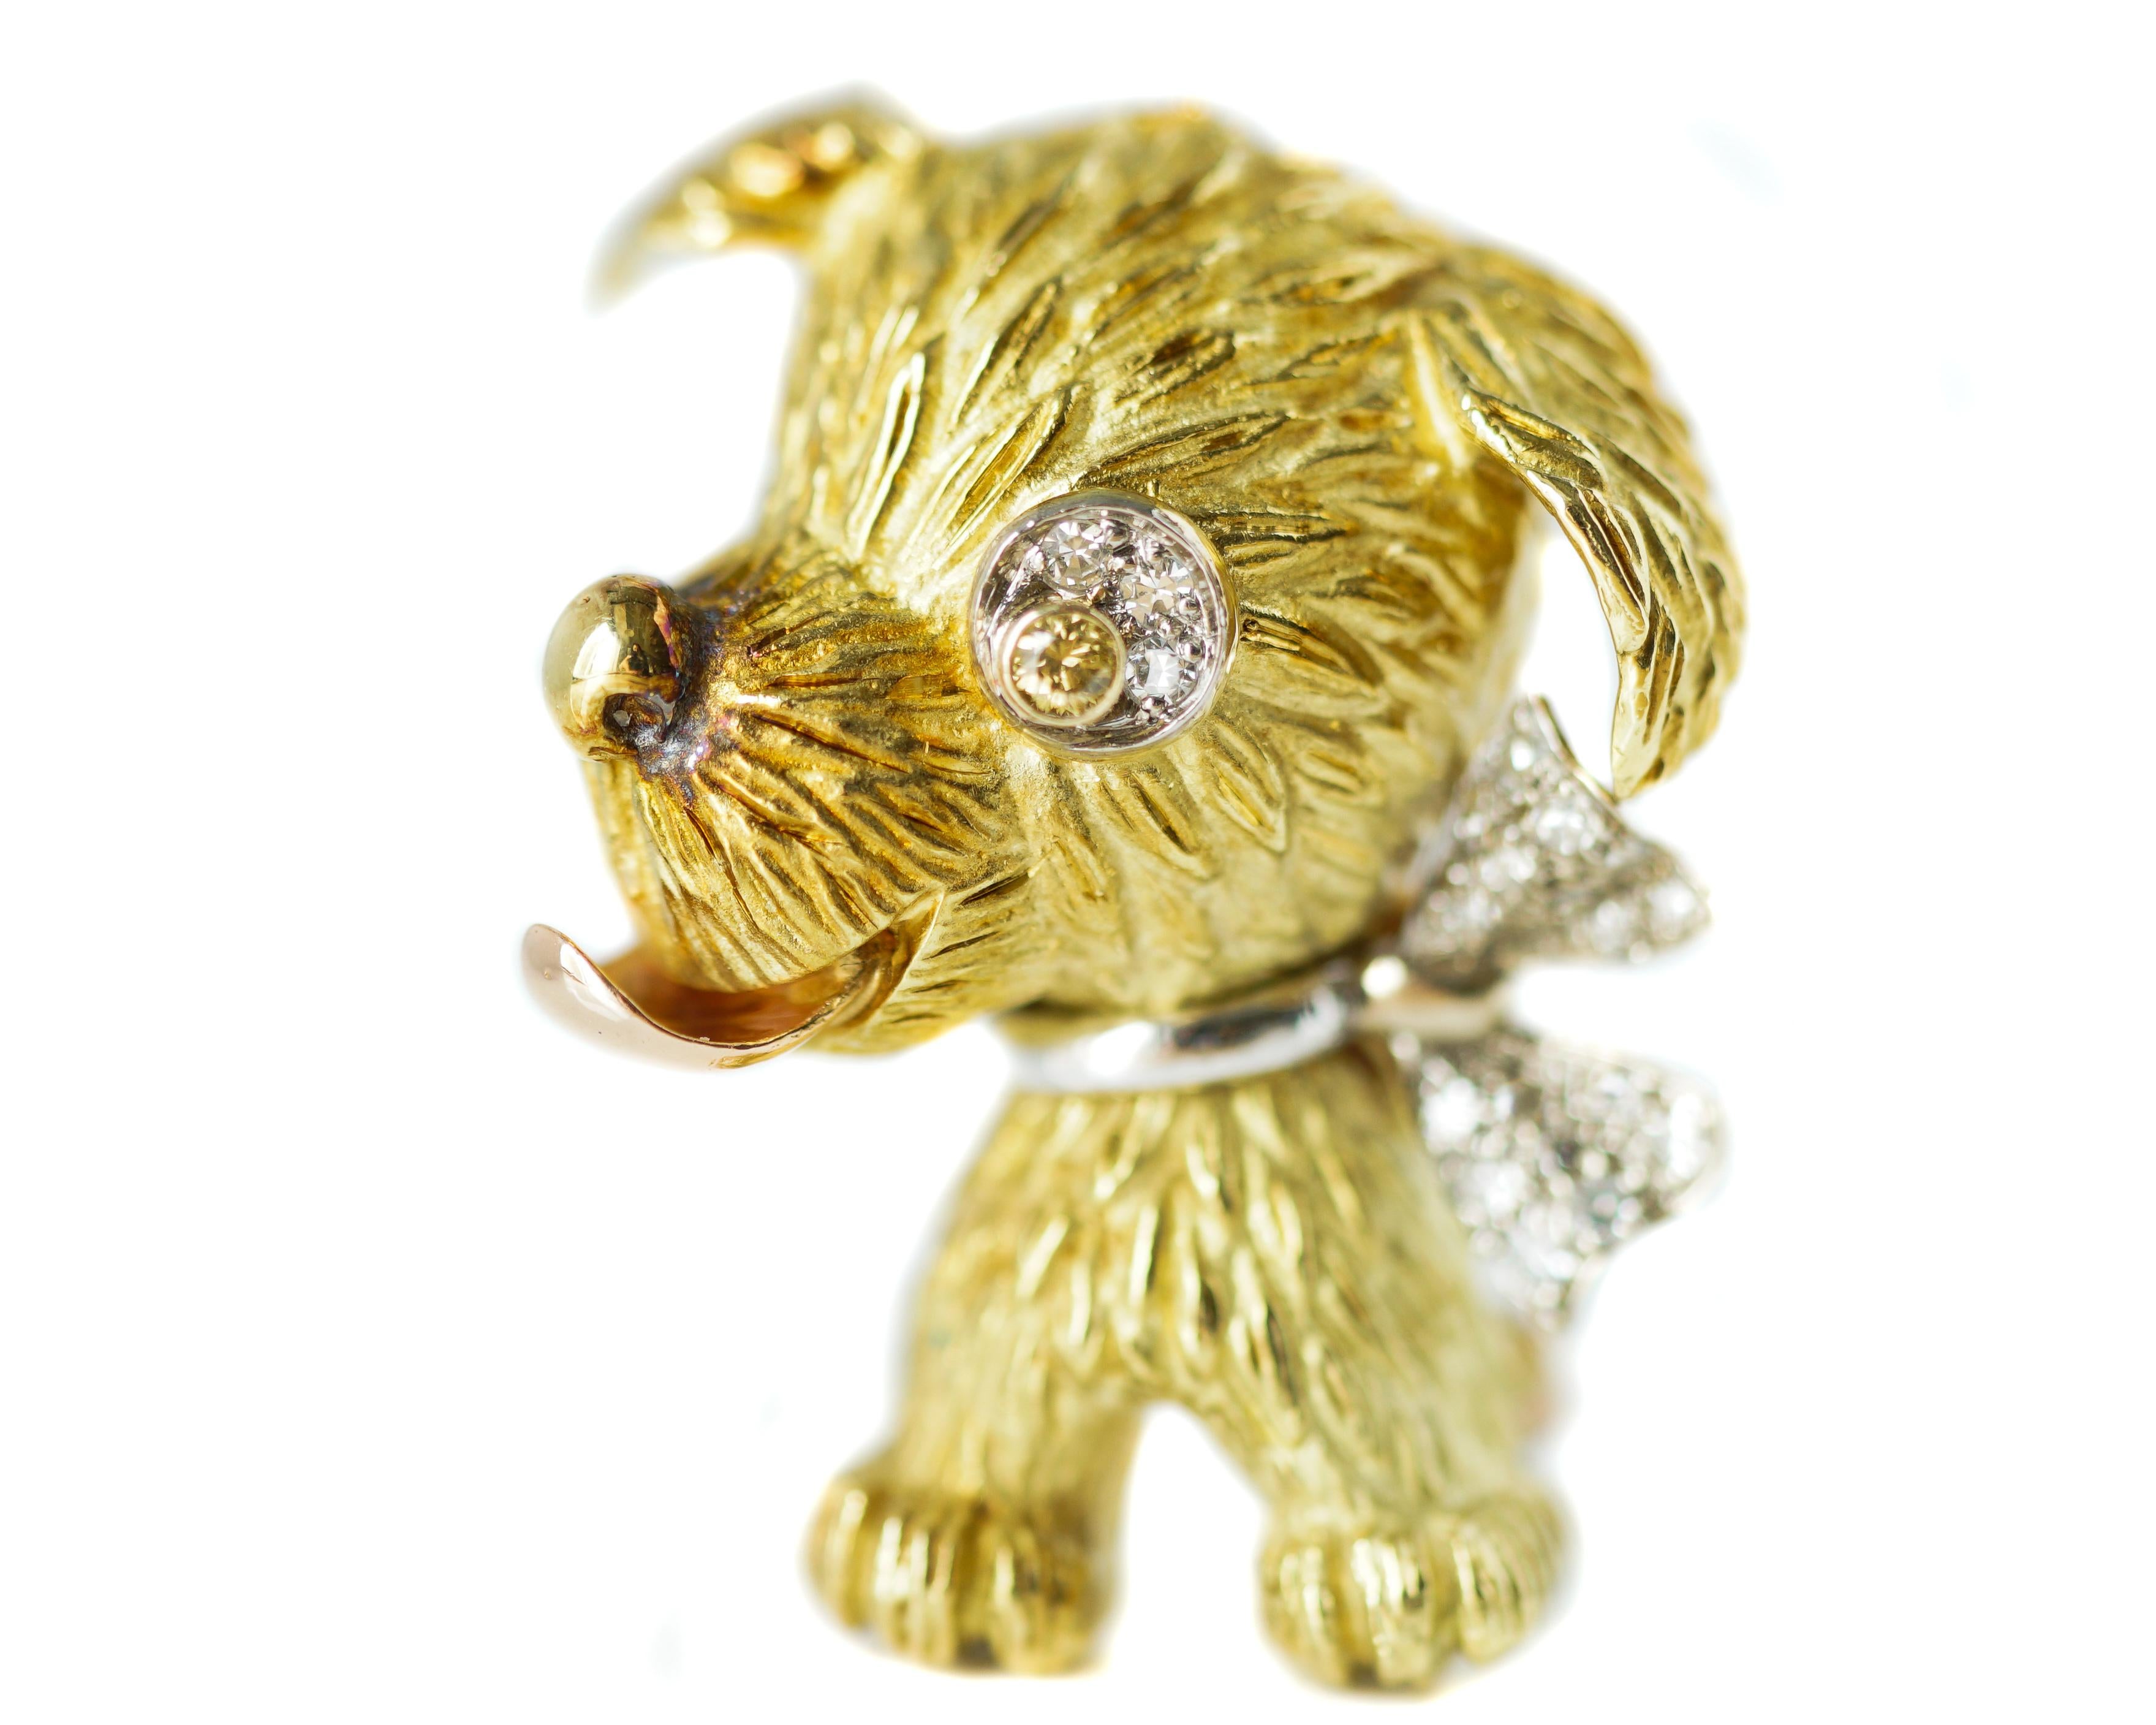 Features:
Large Headed Puppy Attentively Seated with Perky Ears, Round Nose, Sparkling Eye and Outstretched Tongue. 
Puppy is wearing a Diamond Bow Collar, 0.15 carat total weight 
Heavily fur-textured 18 karat Yellow Gold Head and Body
Smooth